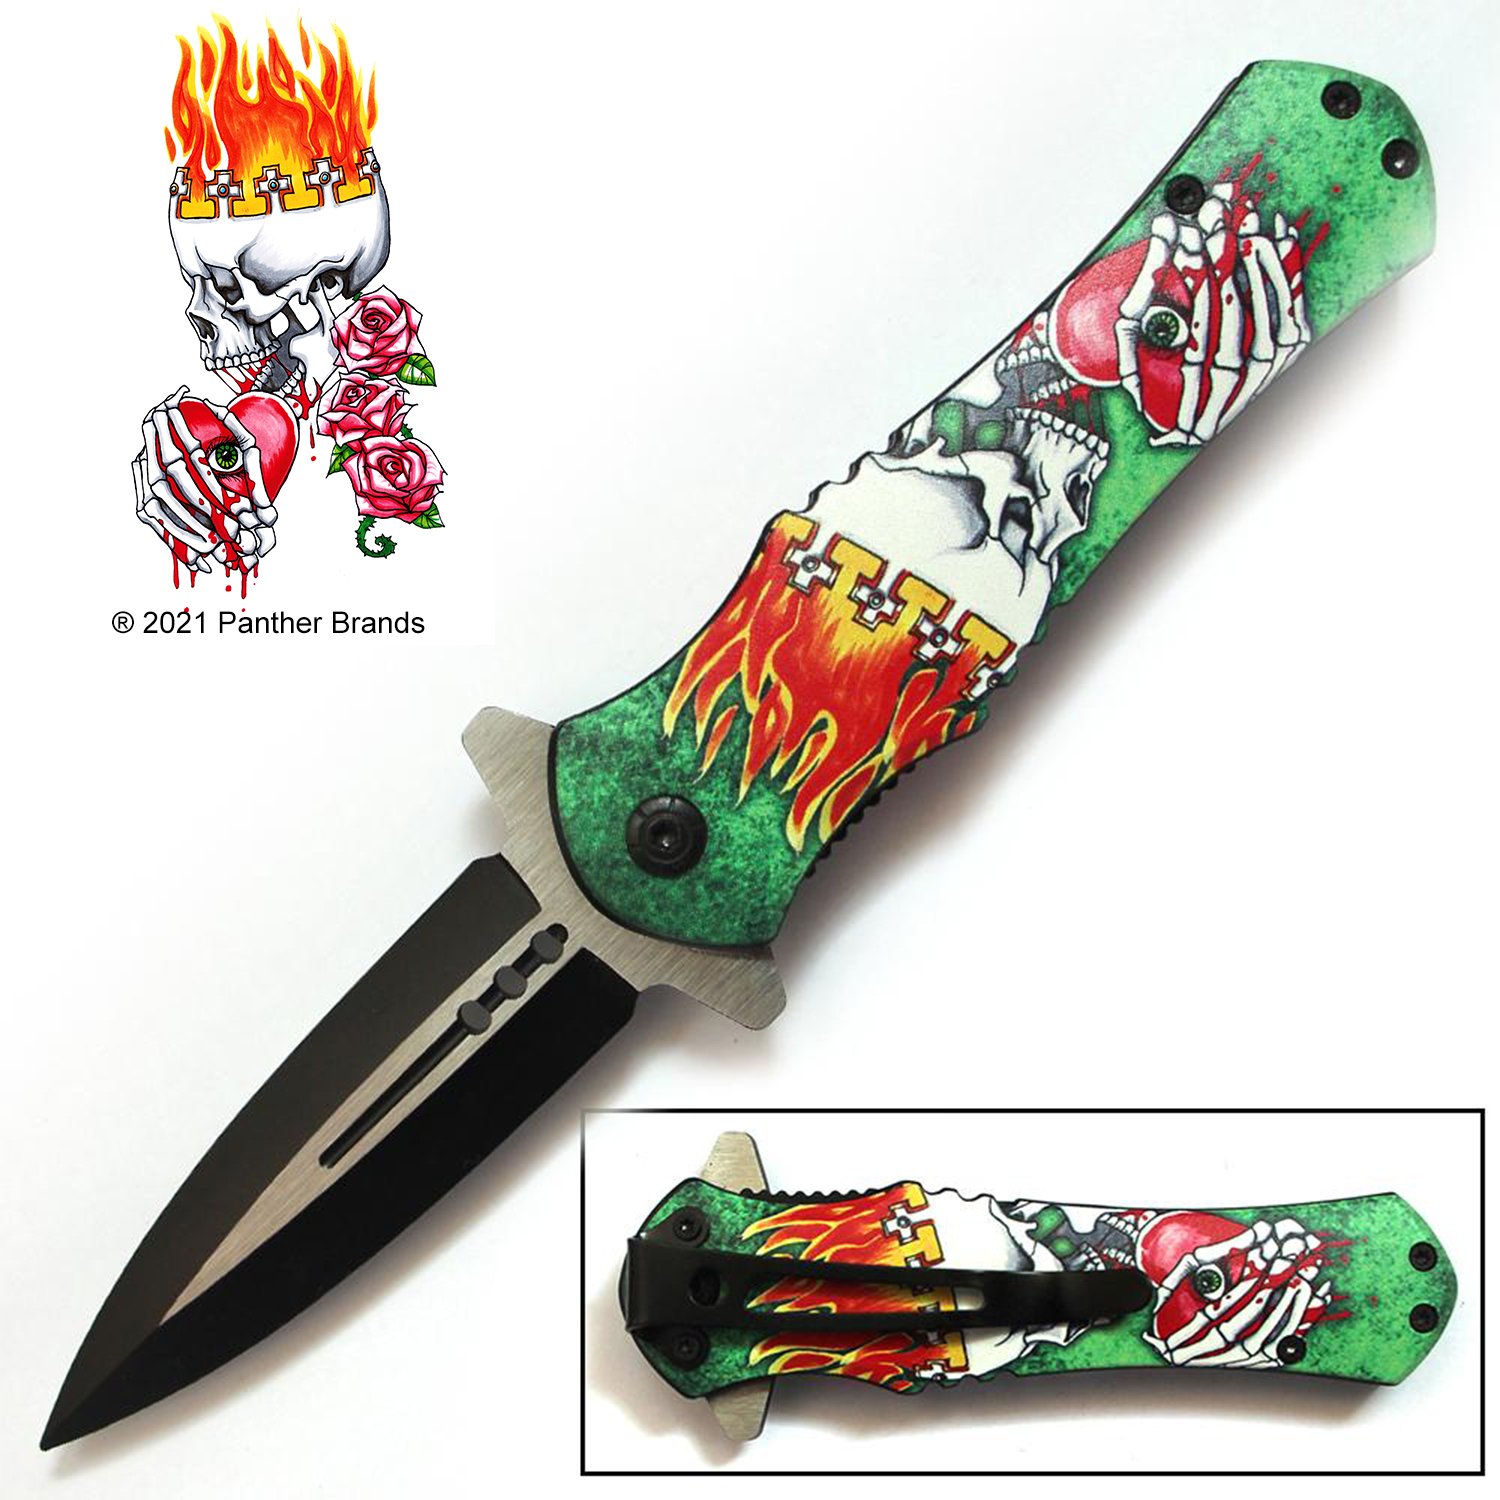 Tiger USA Spring Assisted Knife   Take a Heart (Green)